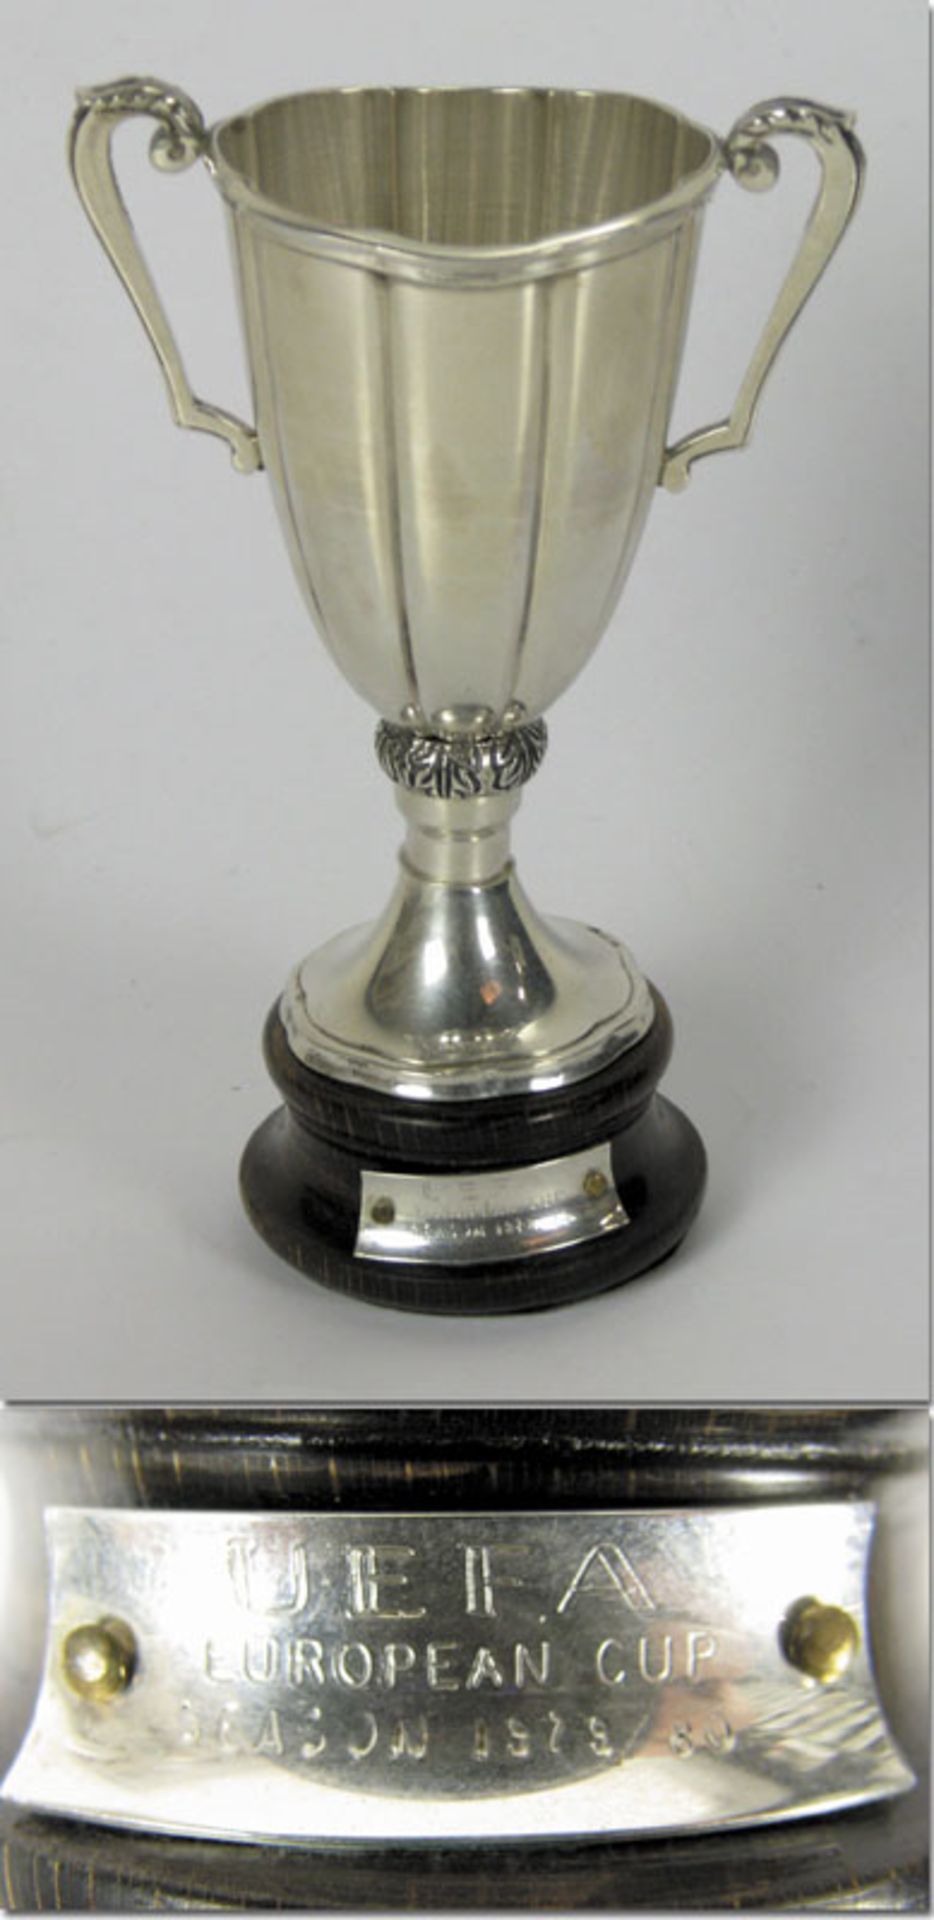 UEFA Eurocup of Cup Winners Version 1970-1993 - Official replica of the European Cup Winner's Cup (